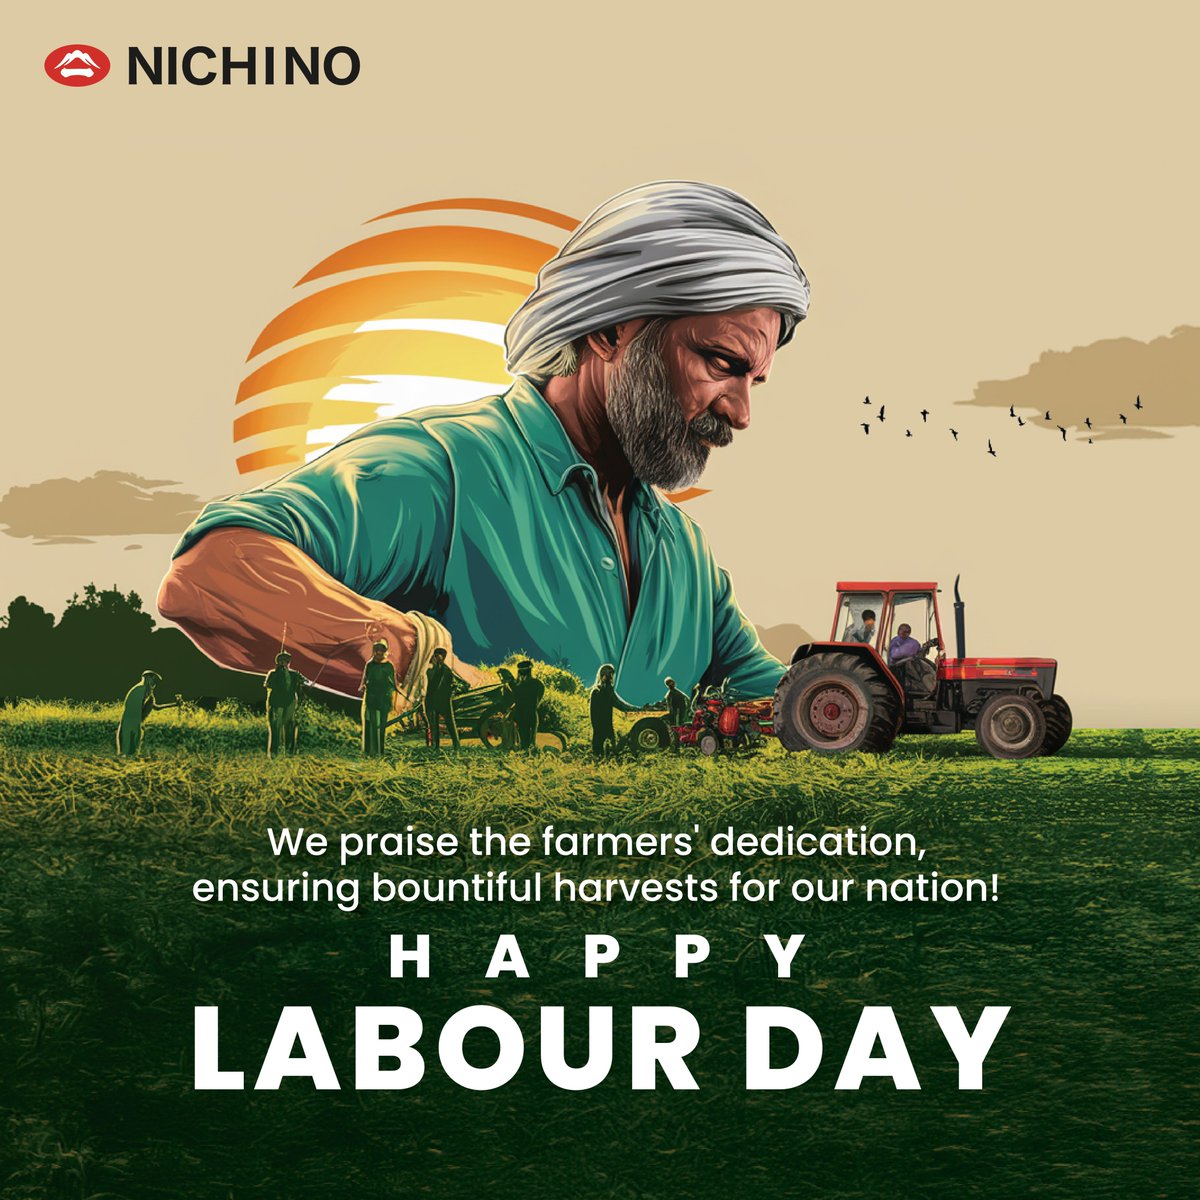 This Labour Day, we extend our heartfelt gratitude to the hardworking farmers across our nation. We salute their commitment to nurturing the soil and crops, ensuring bountiful harvests that sustain us all.